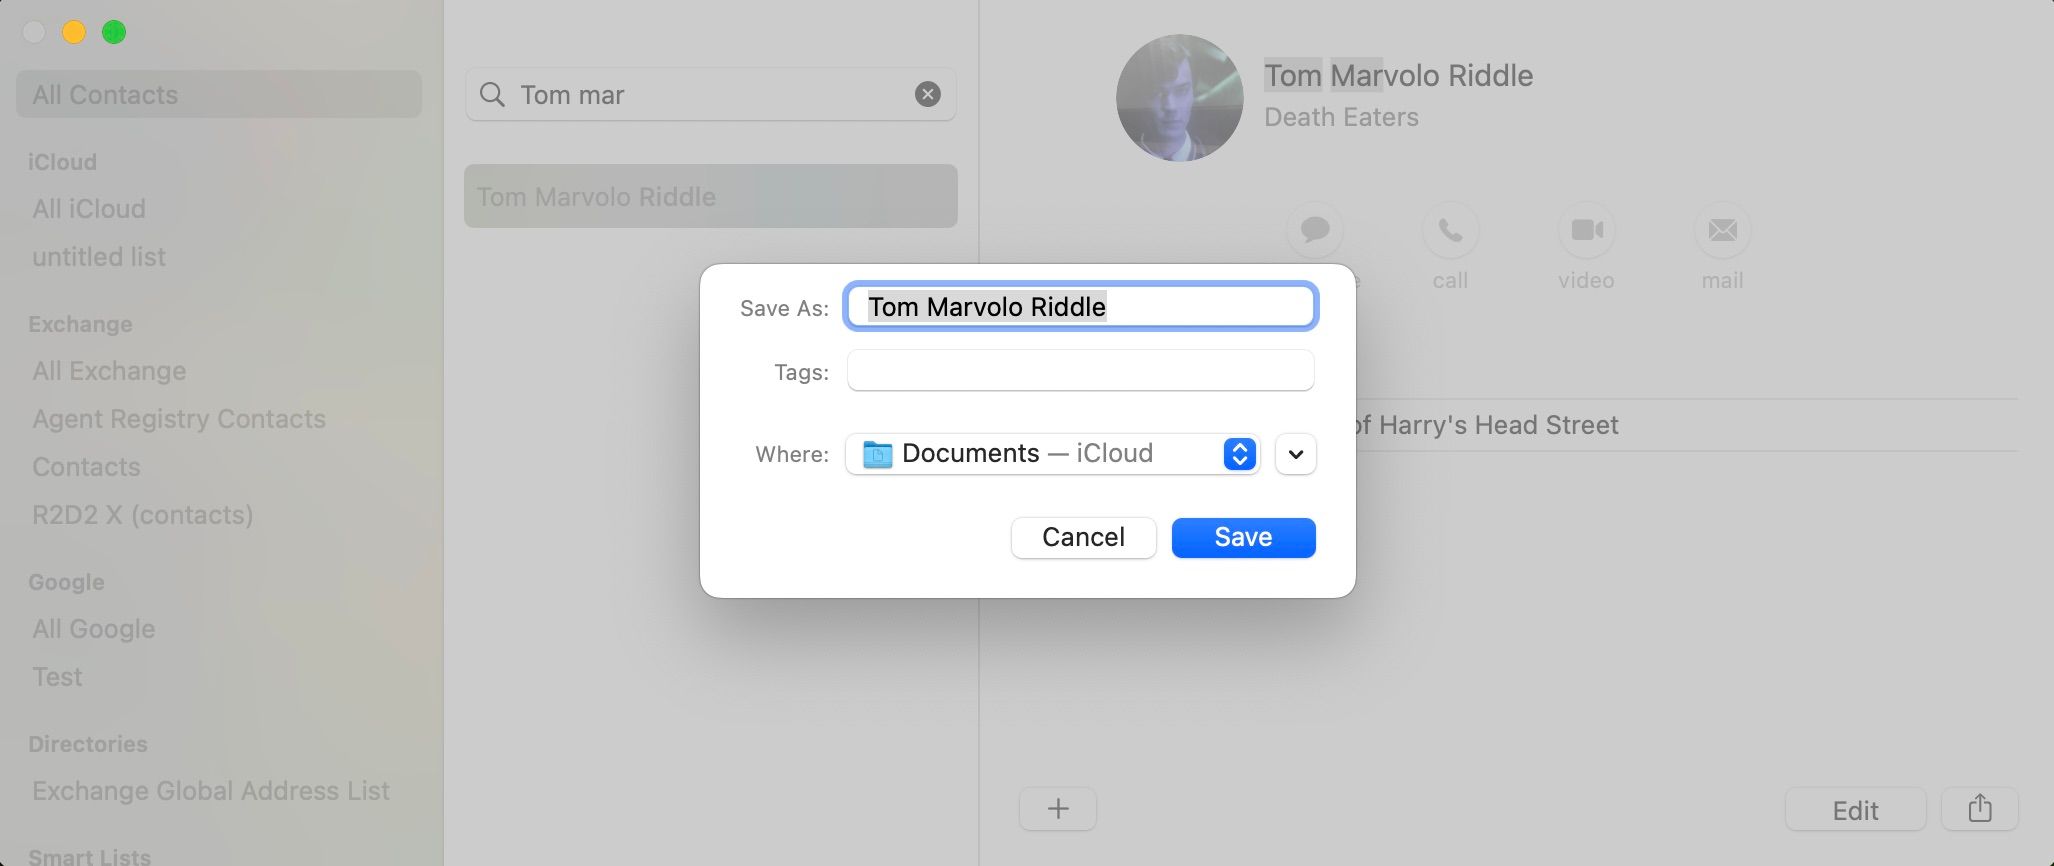 Contacts export dialogue box for Tom Marvolo Riddle